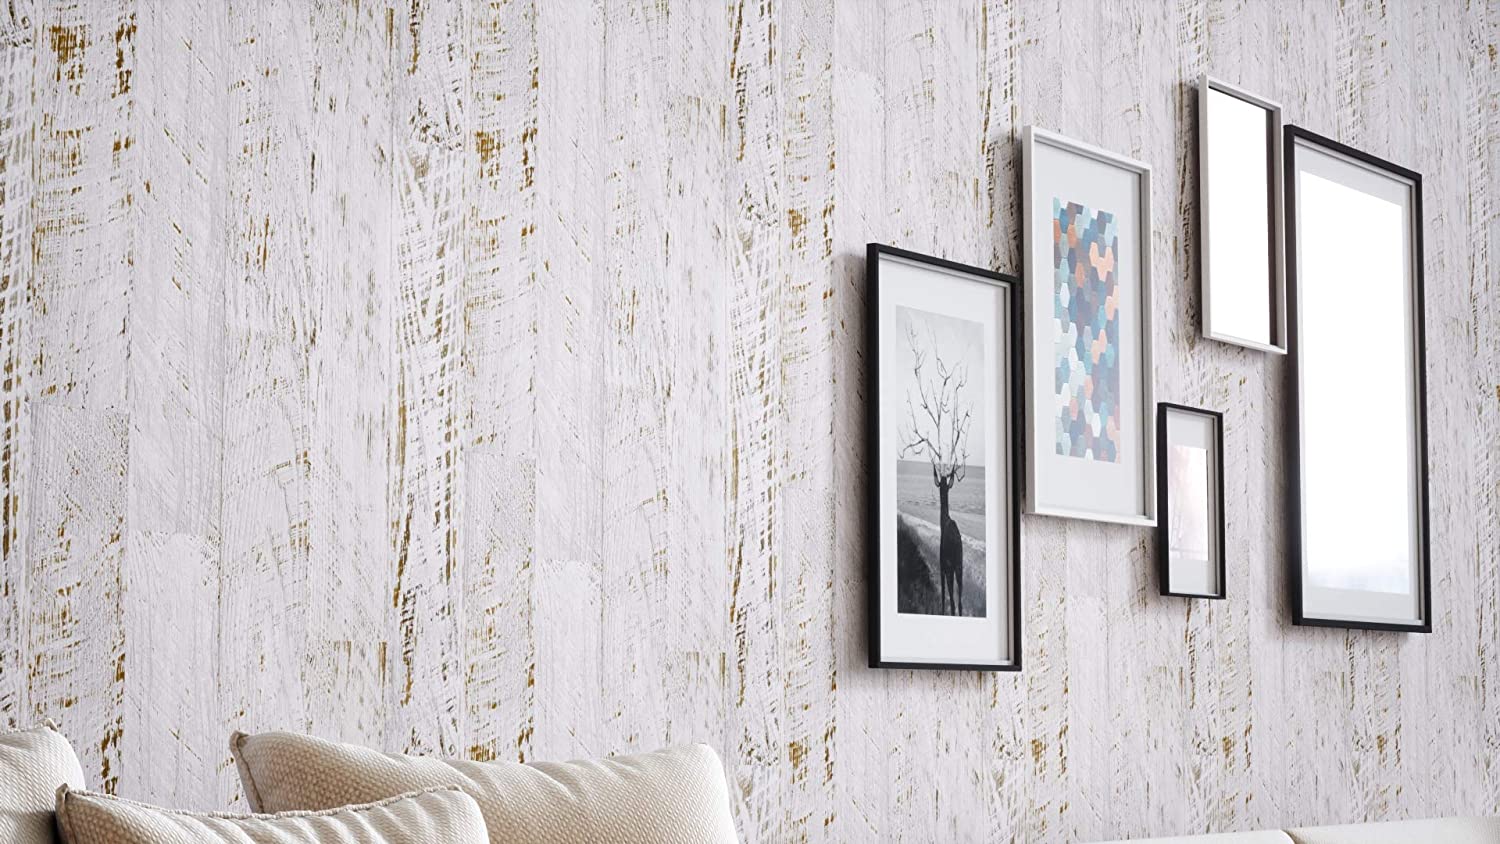 Newroom Wood Wallpaper White Wooden Beams Country House Non-Woven Wallpaper Brown Modern Design 3D Look Wallpaper Wooden Wall Natural Wood Wooden Panels Vintage Includes Wallpaper Guide